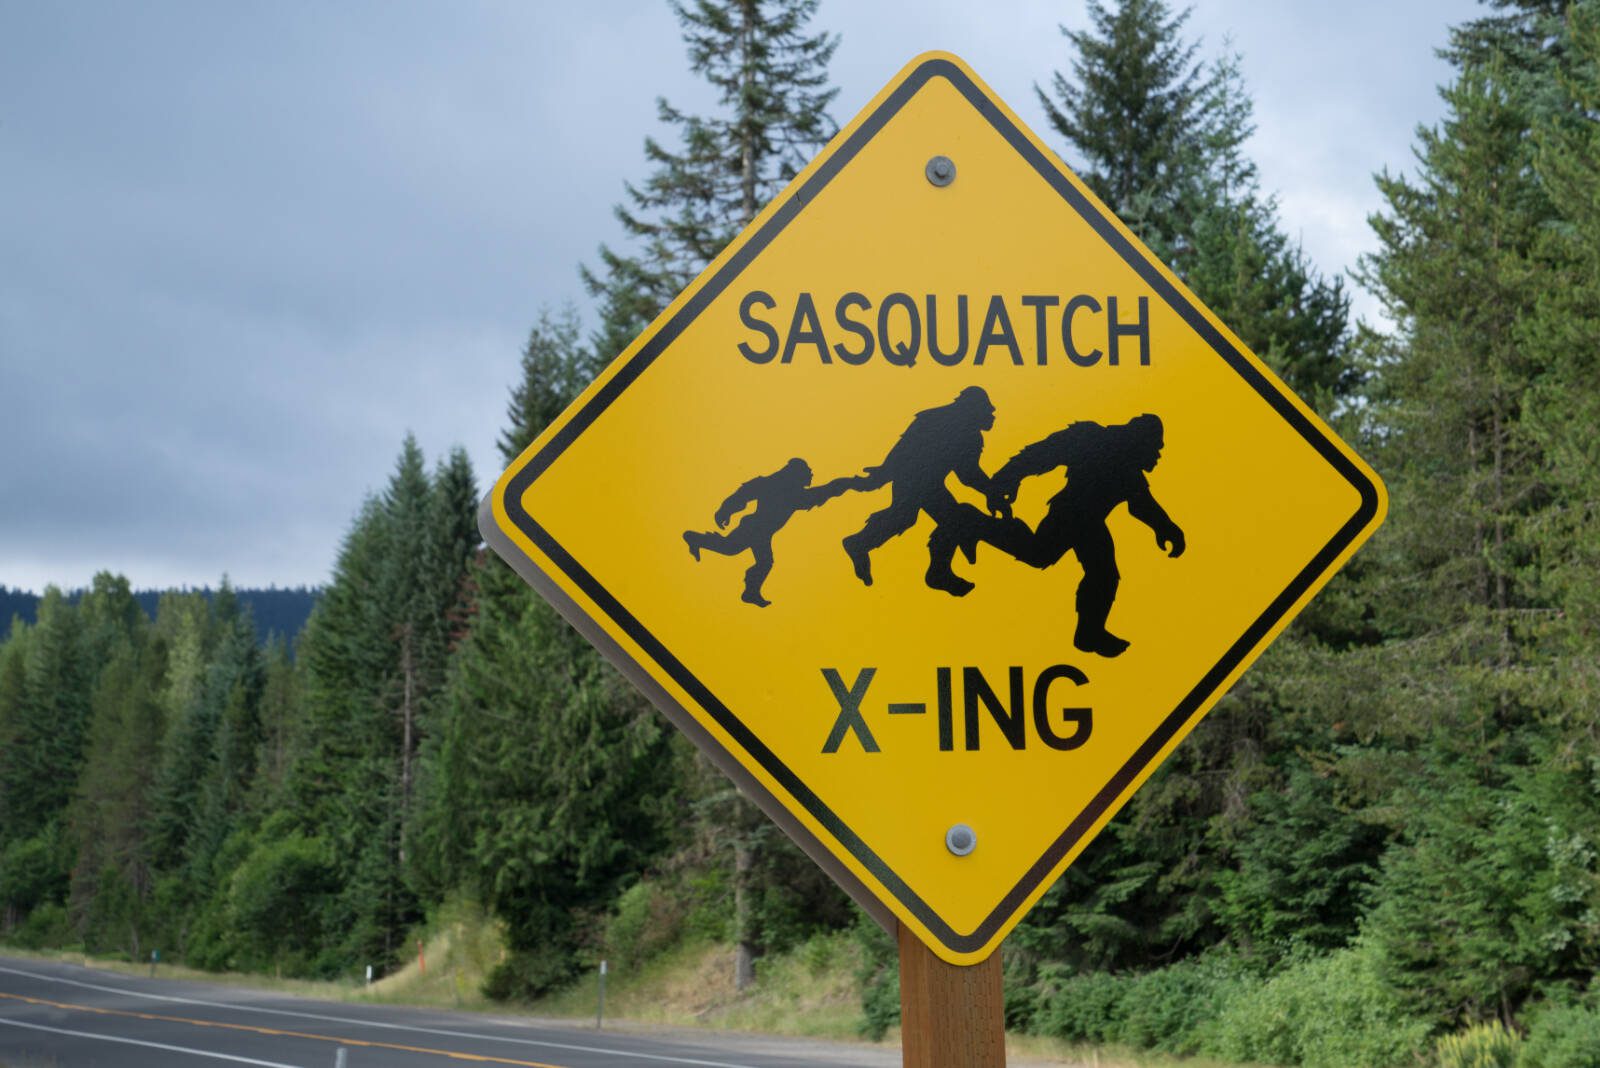 Described as a large, ape-like creature, sightings of Sasquatch have been reported for centuries, with many claiming to have encountered the elusive beast firsthand.